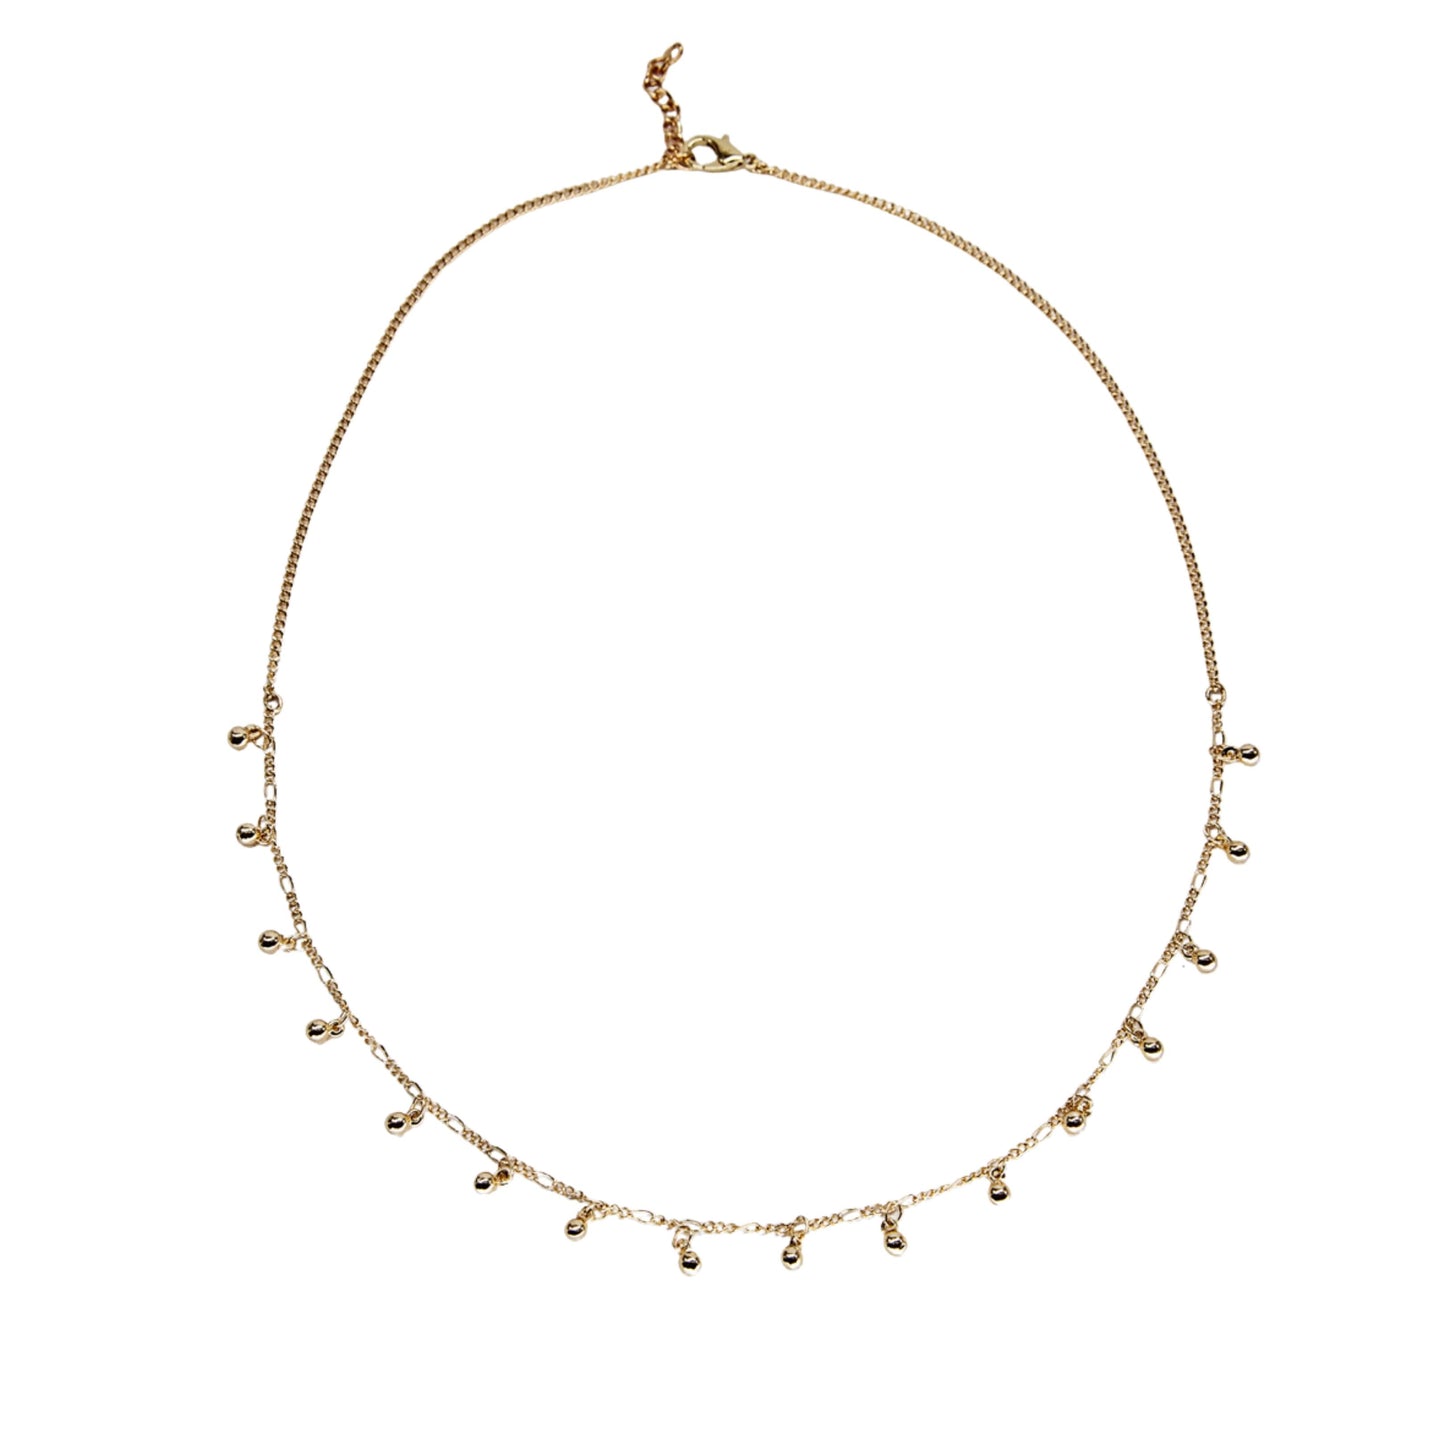 Gold Delicate Hanging Bauble Necklace